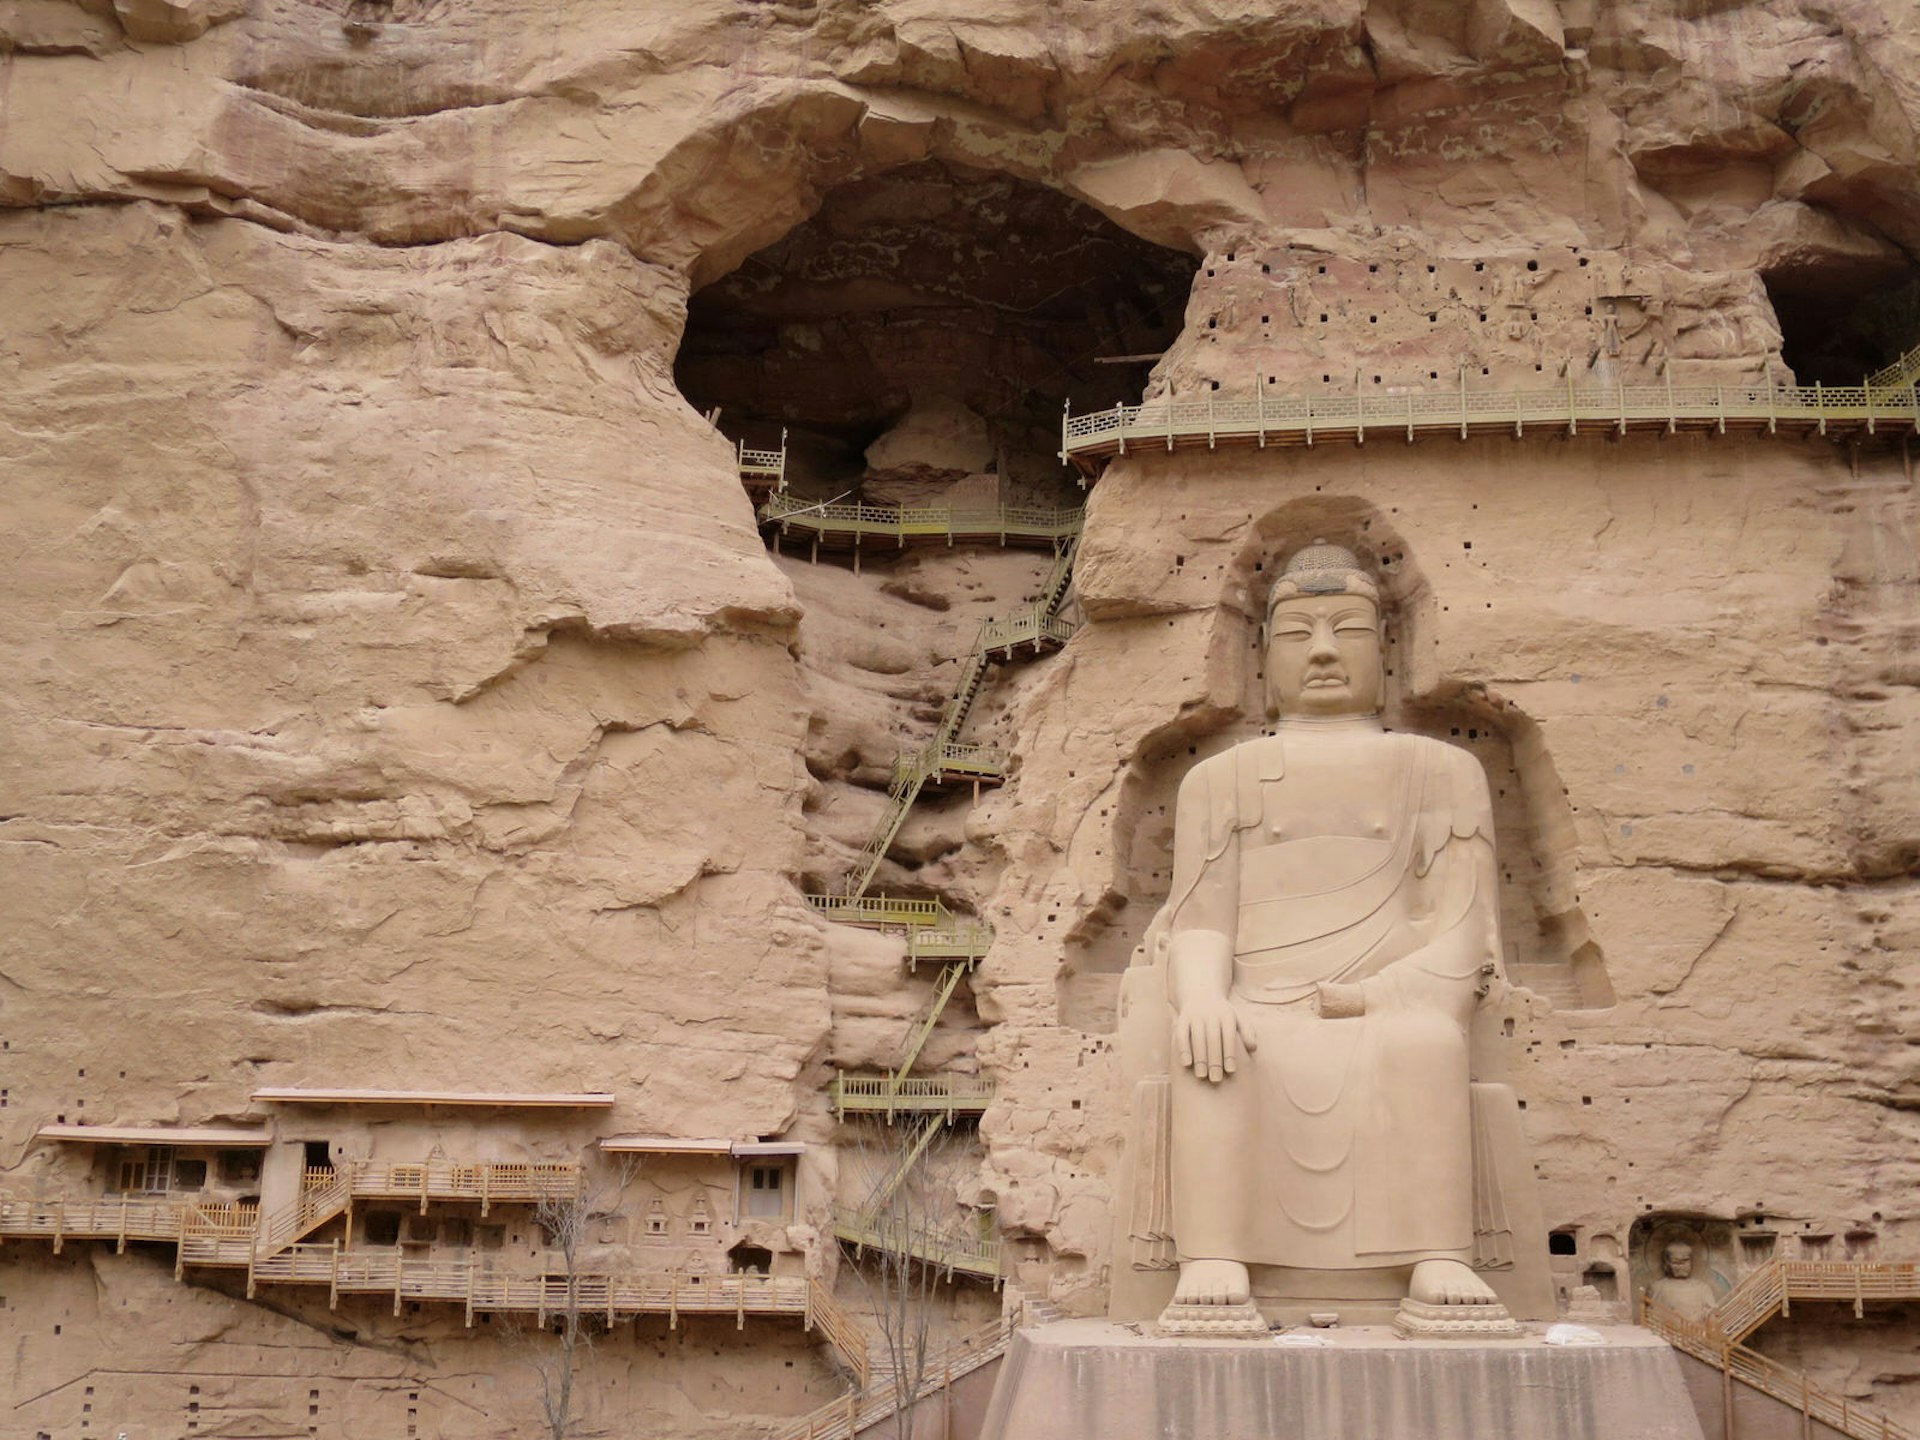 A huge seated Buddha statue carved into a sheer desert cliff; to the left, a high-up cave connected by a series of ladders and walkways.